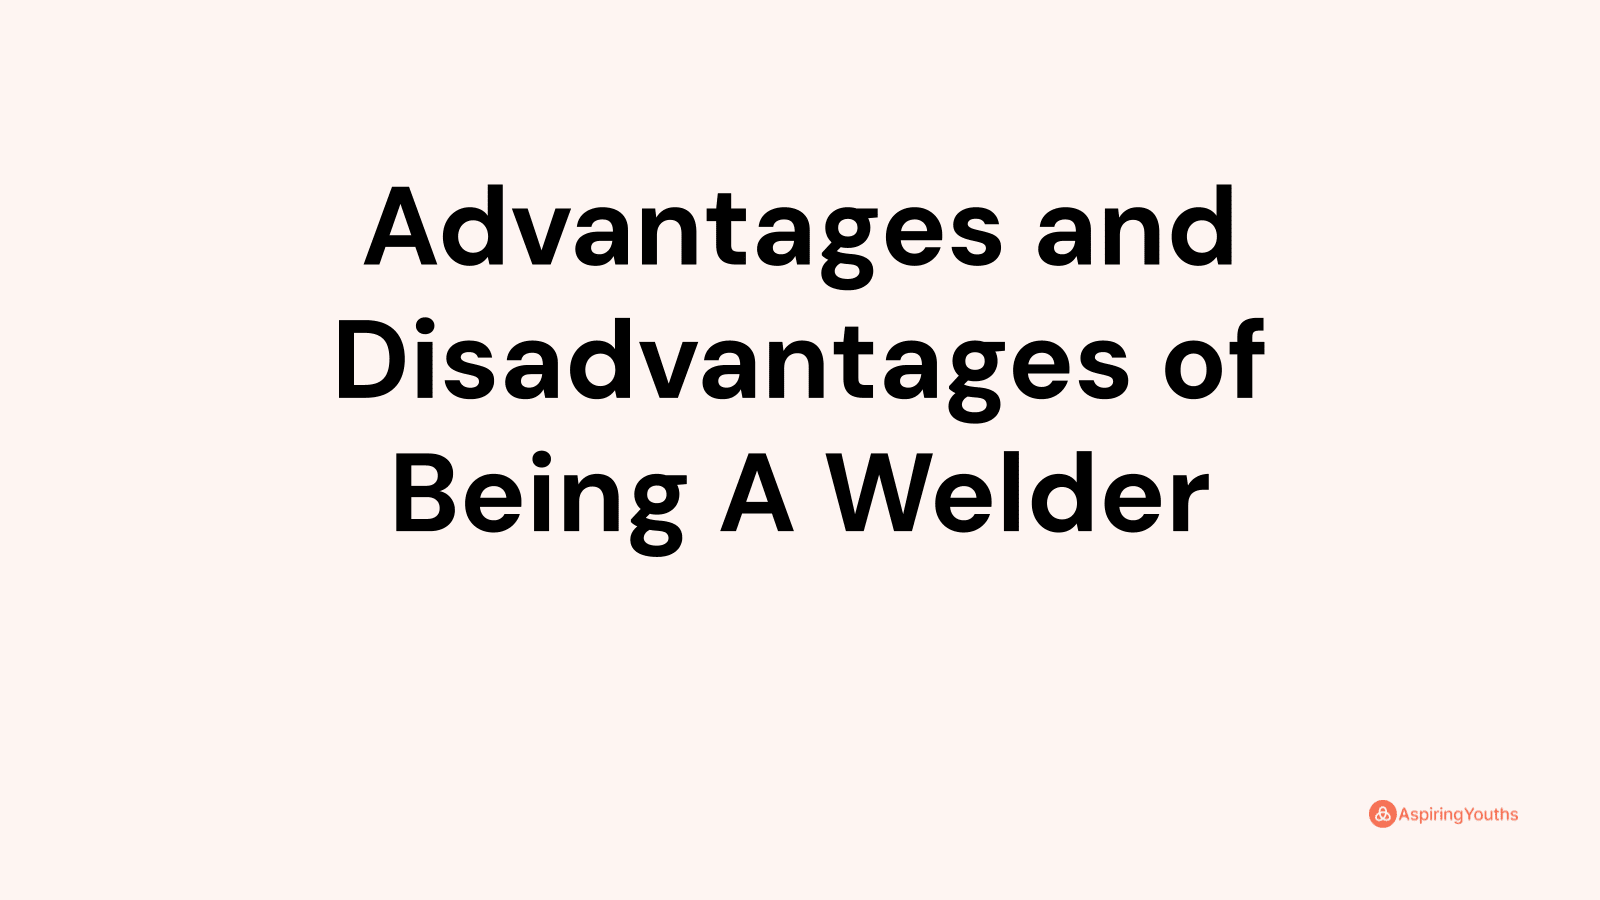 Advantages and disadvantages of Being A Welder